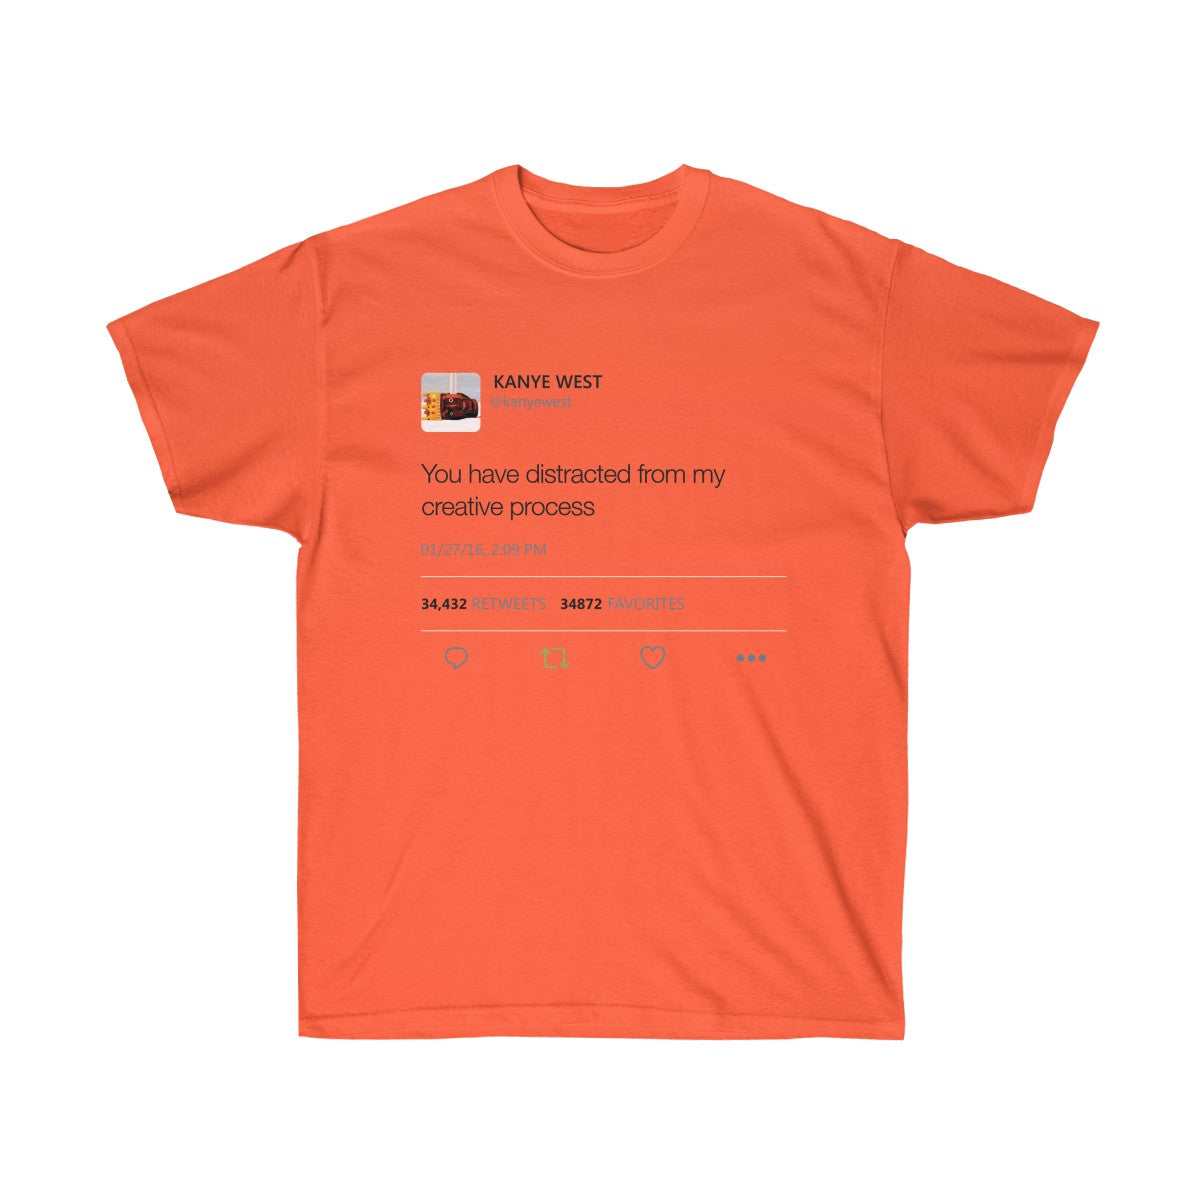 You have distracted from my creative process - Kanye West Tweet T-Shirt-Orange-S-Archethype